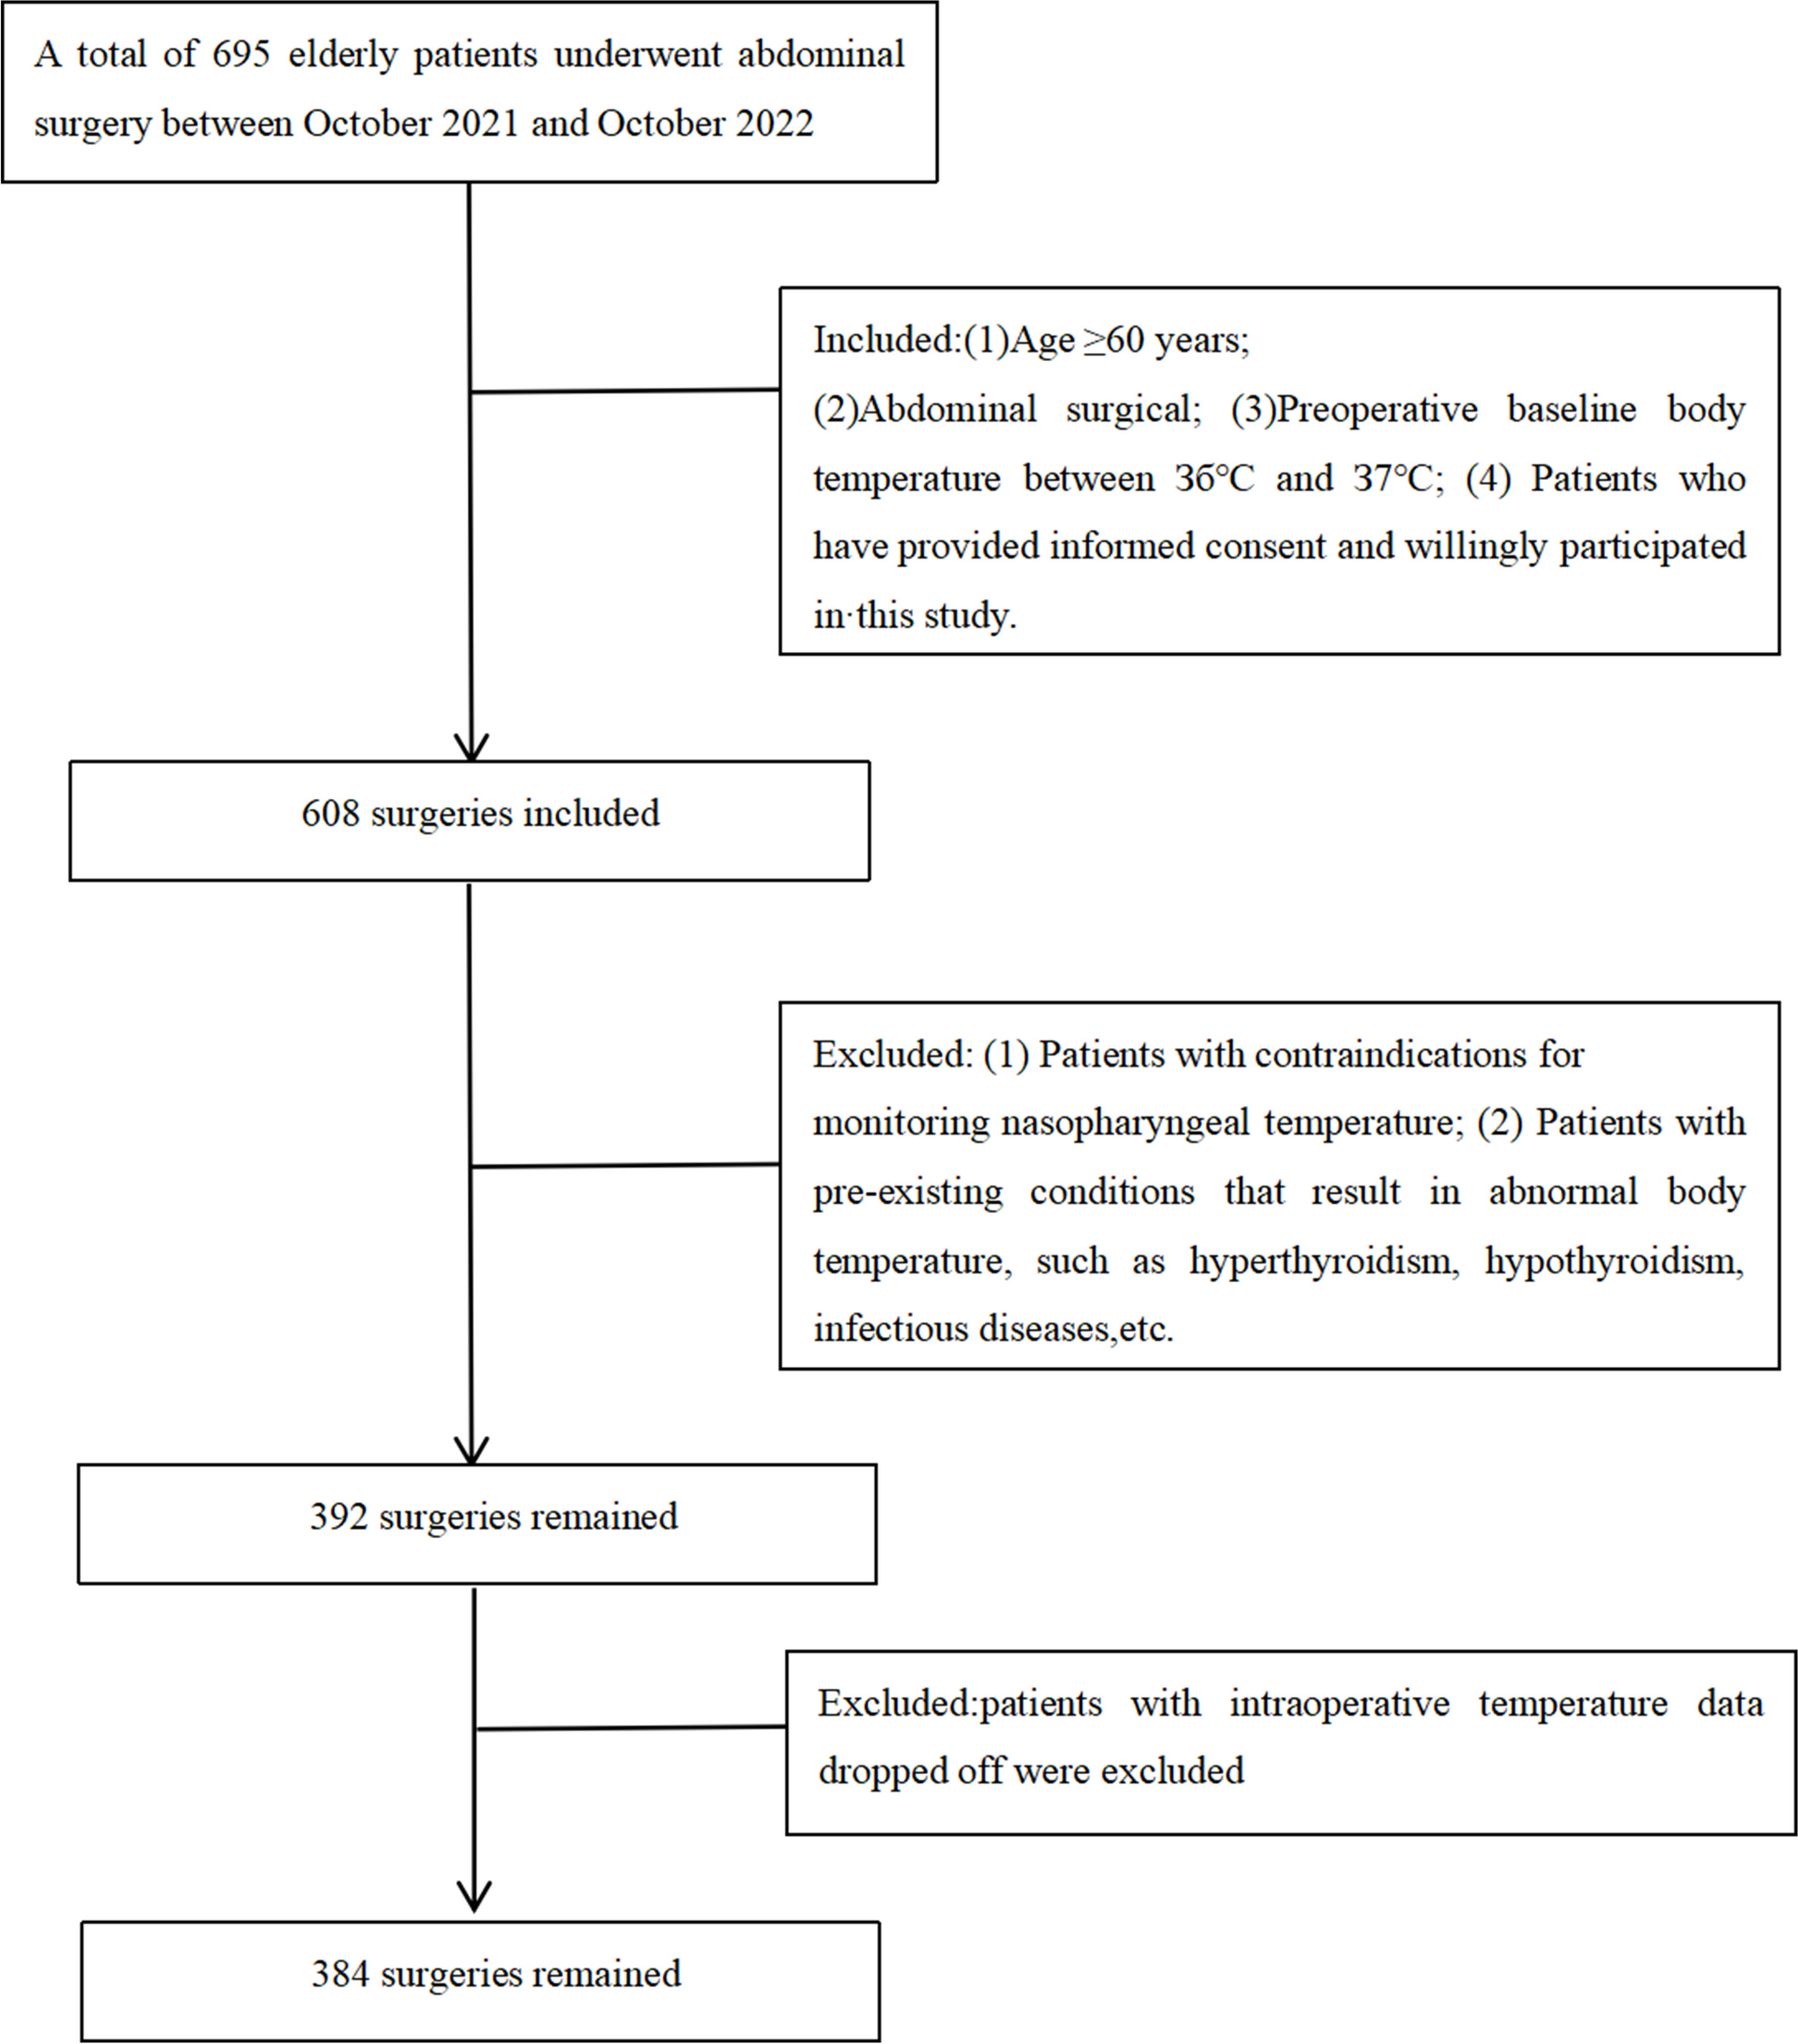 Impact of intraoperative hypothermia on the recovery period of anesthesia in elderly patients undergoing abdominal surgery